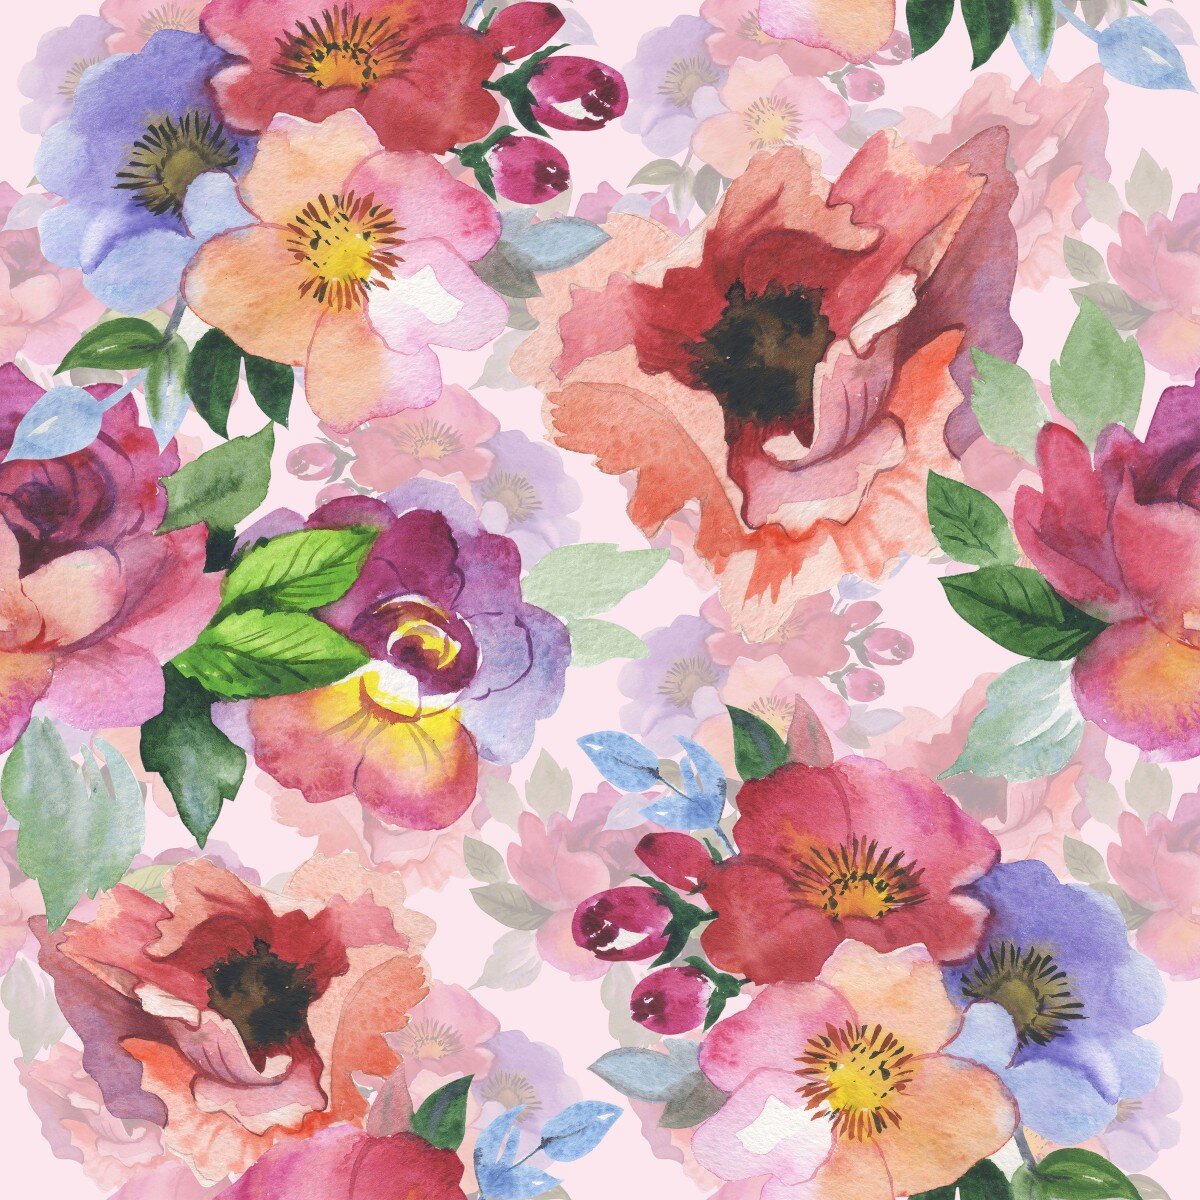 Watercolor Floral Repositionable Wallpaper Kit , Peel and Stick